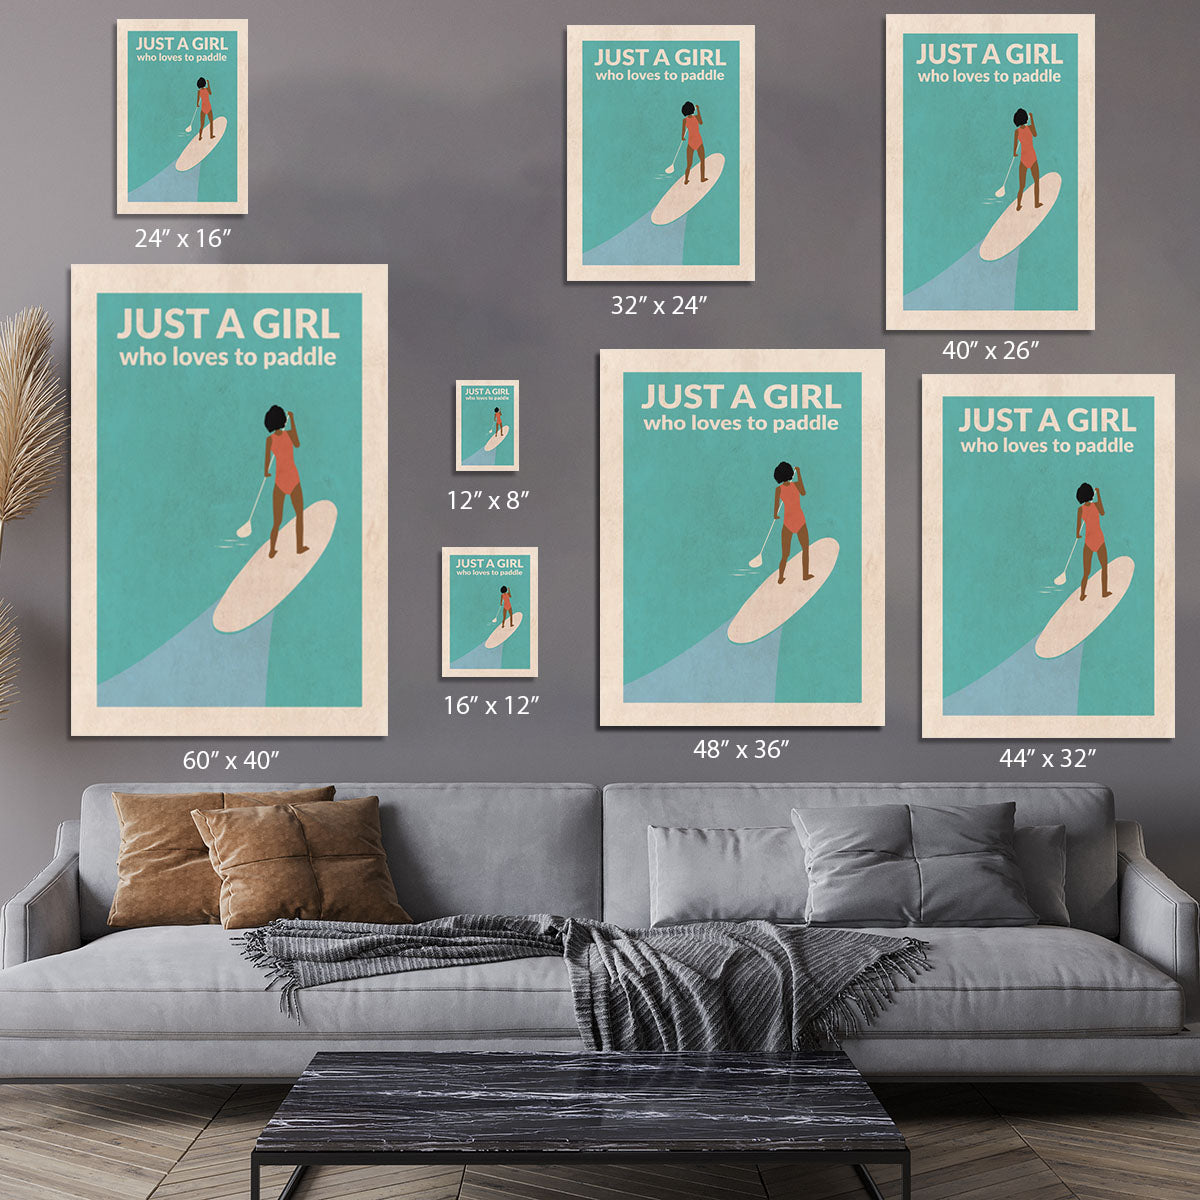 Just a Girl Who Loved To Paddle afro Canvas Print or Poster - 1x - 7